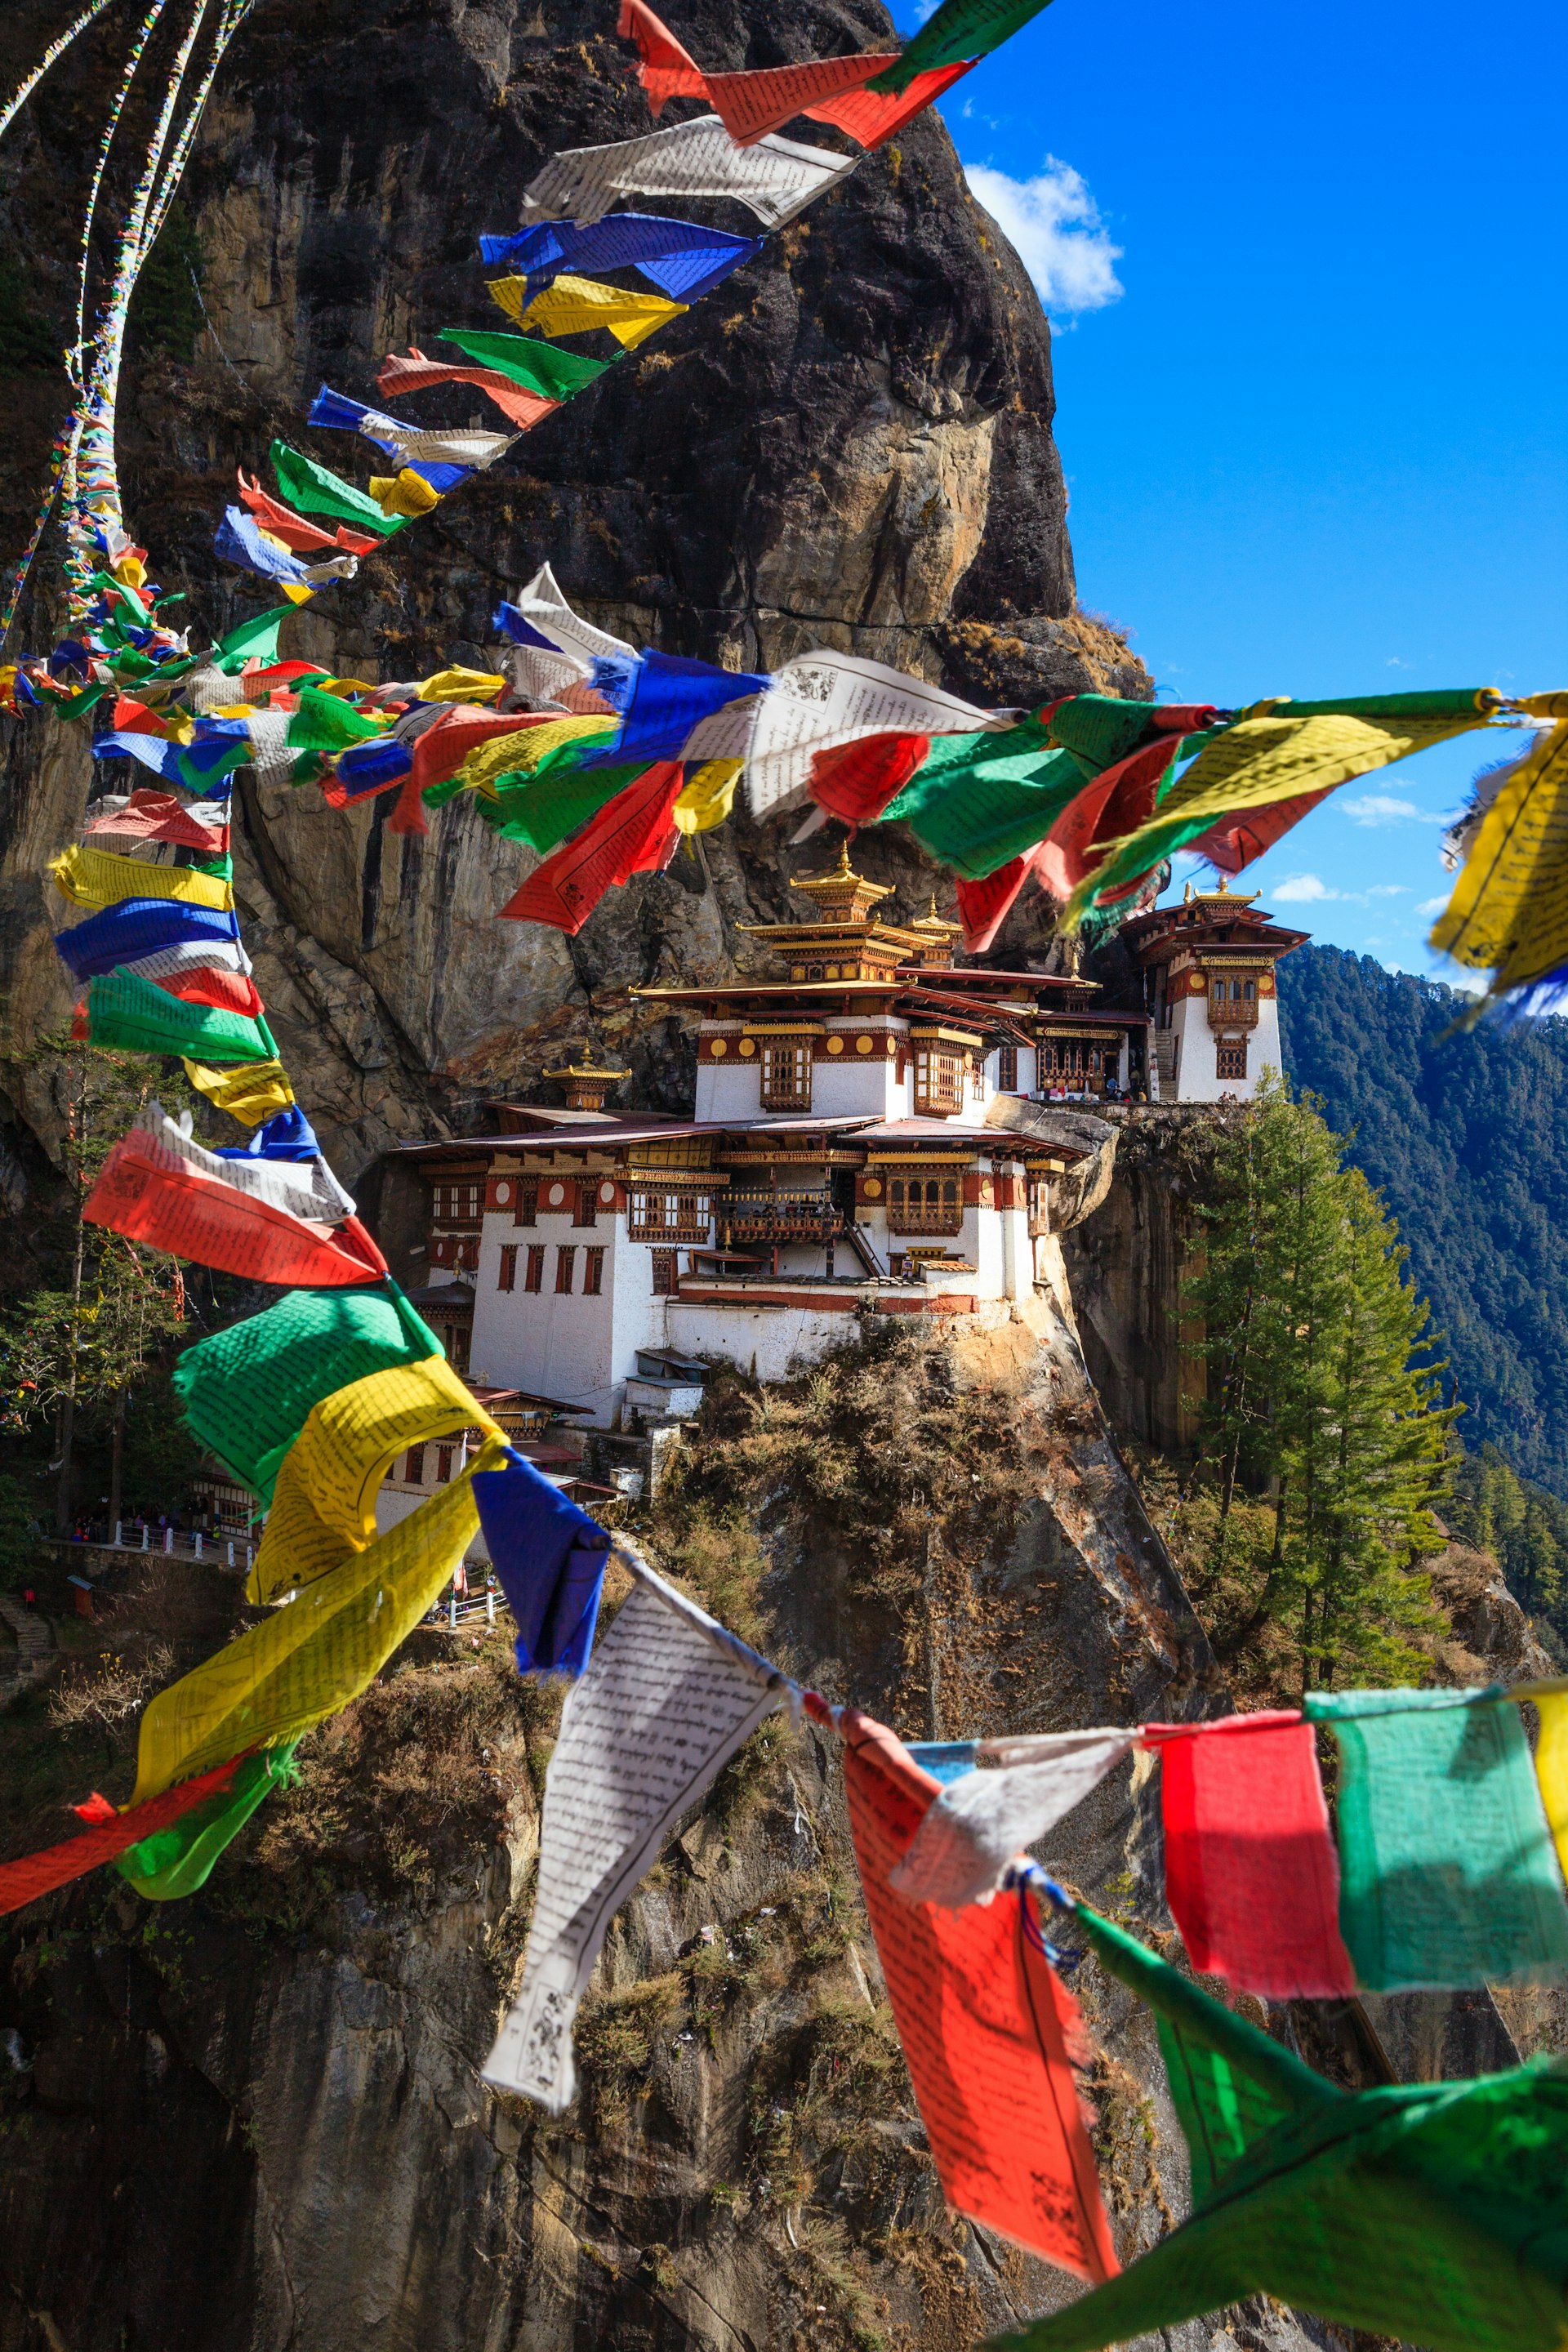 Colorful prayer flags flutter in the breeze. A white monastery structure, built into the side of the mountain, is in the background